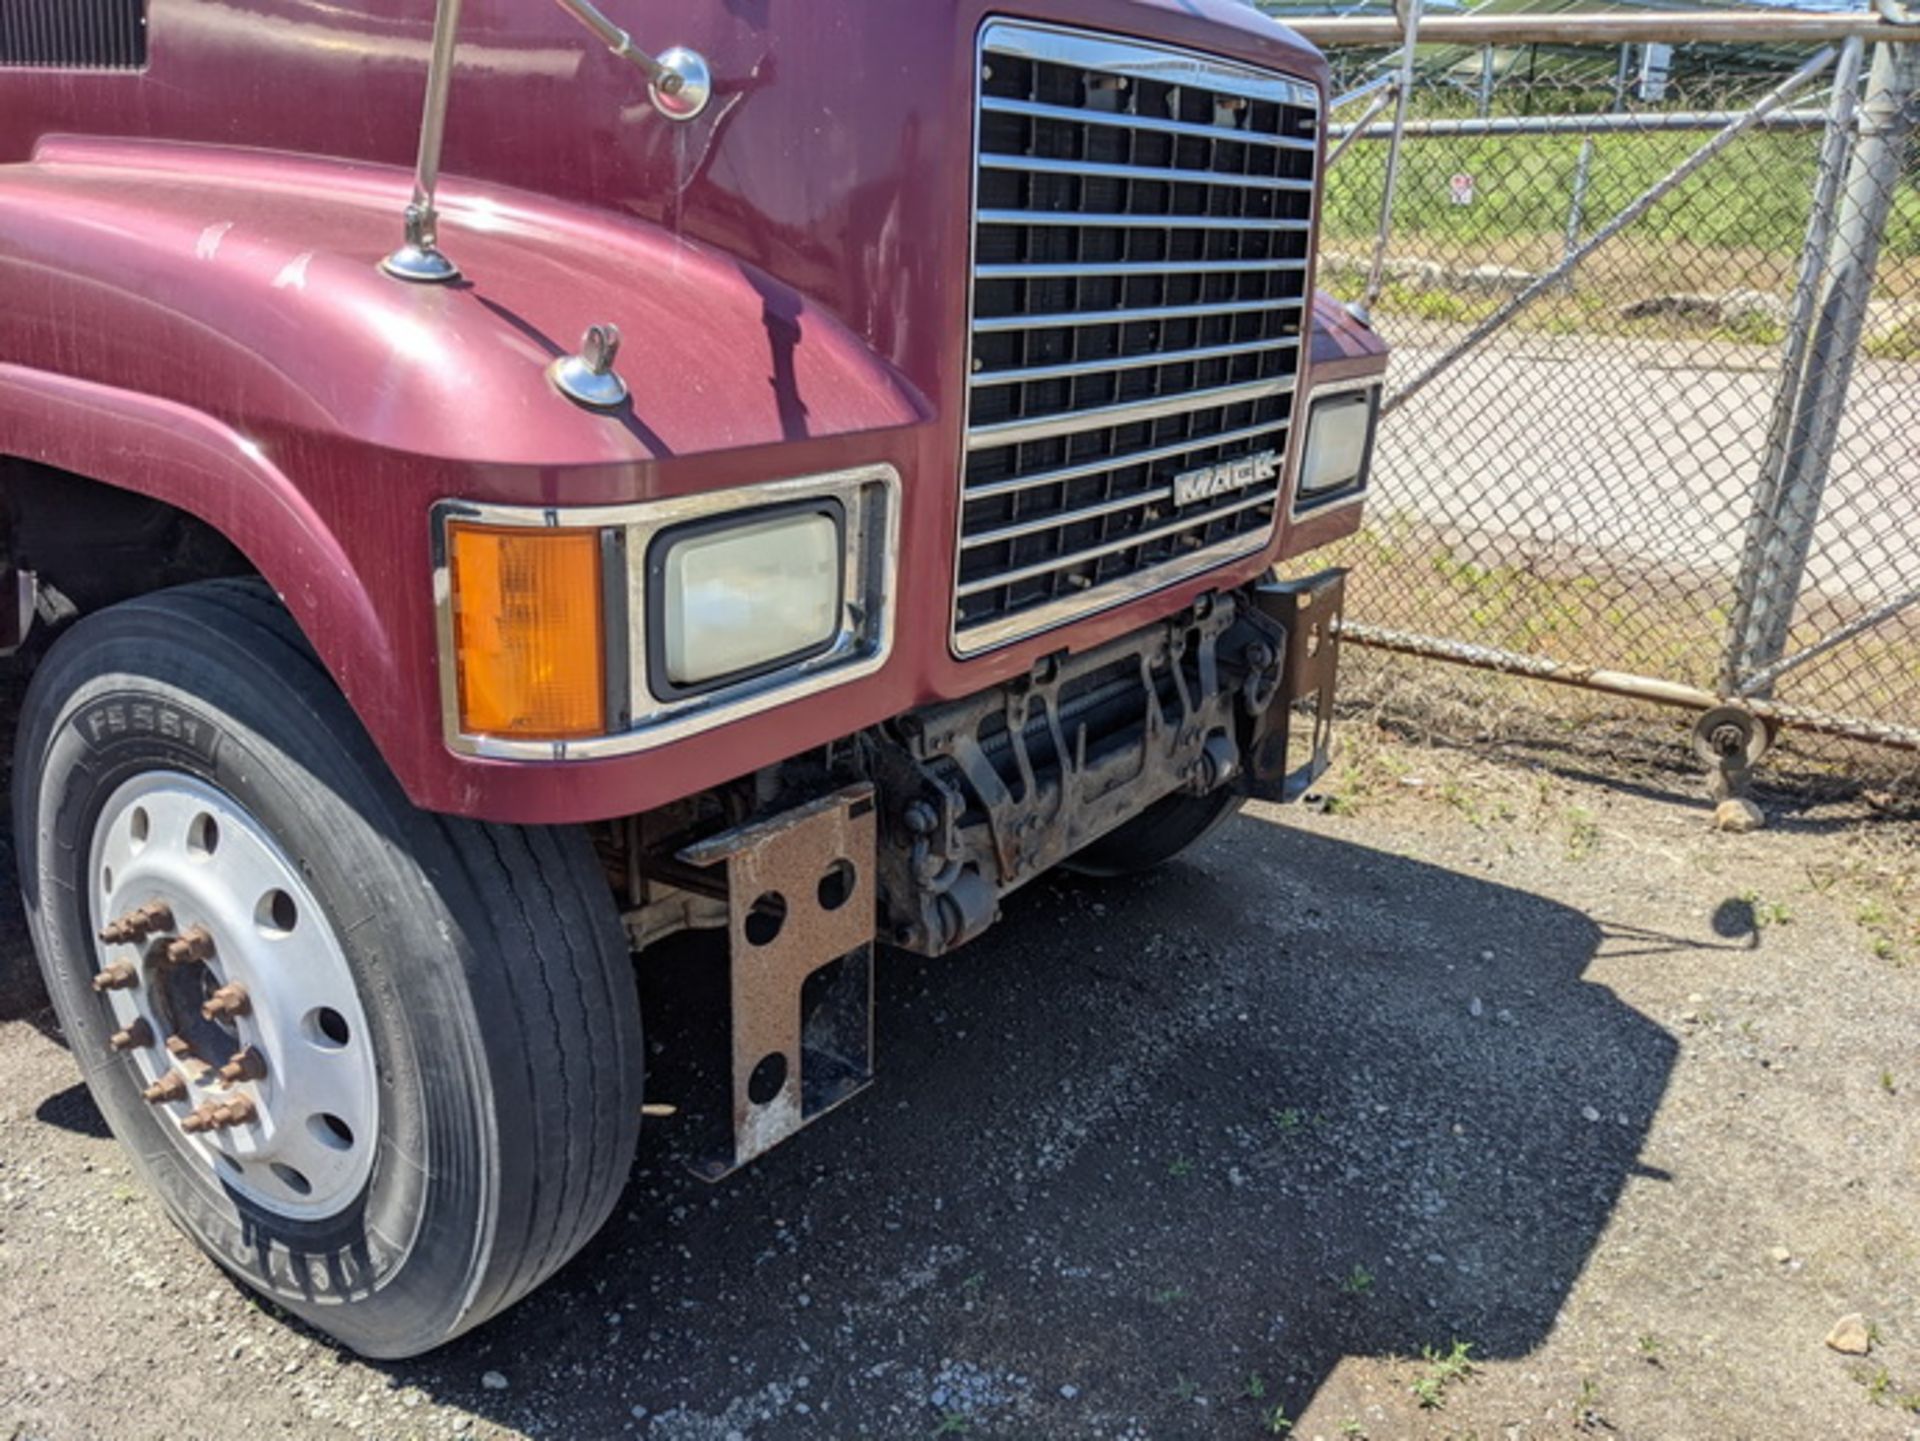 2008 Mack CHU613 tandem axle sleeper, PARTS TRUCK, cannibalized, VIN# 1M1AN07Y38N003443, 11R24.5 - Image 2 of 12